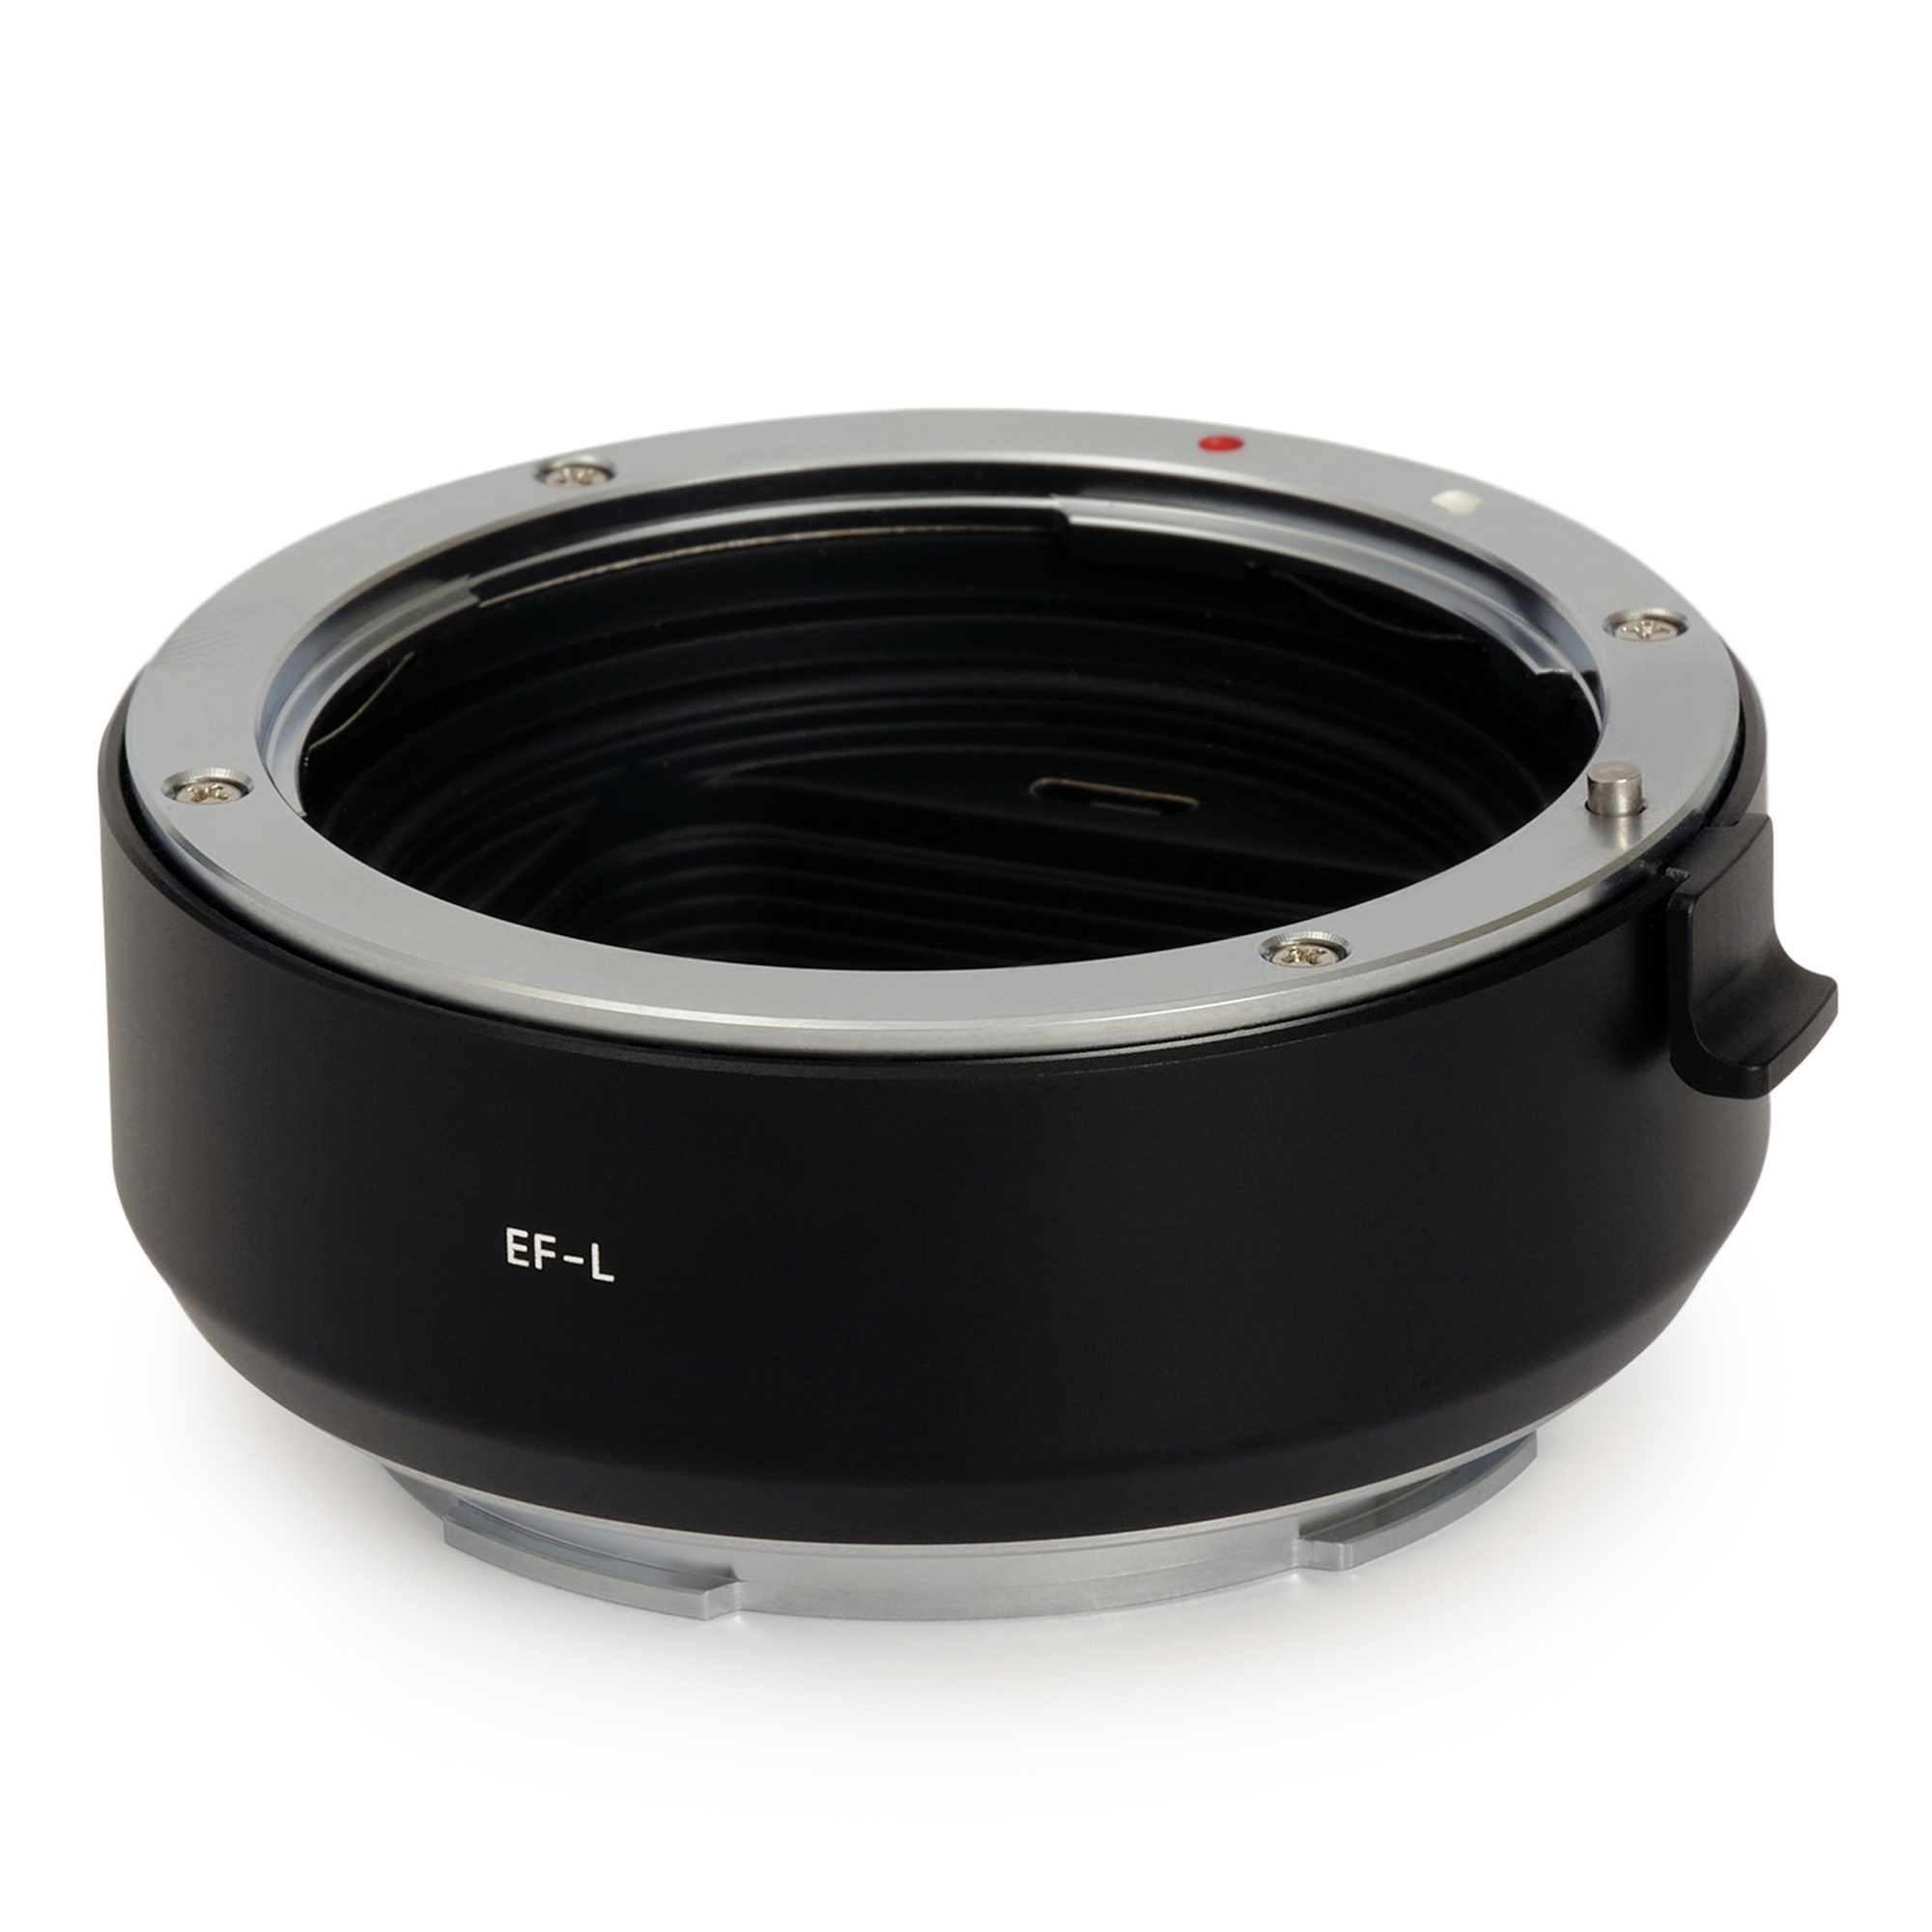 Urth Electronic Lens Mount Adapter Canon (EF / EF-S) to Leica L